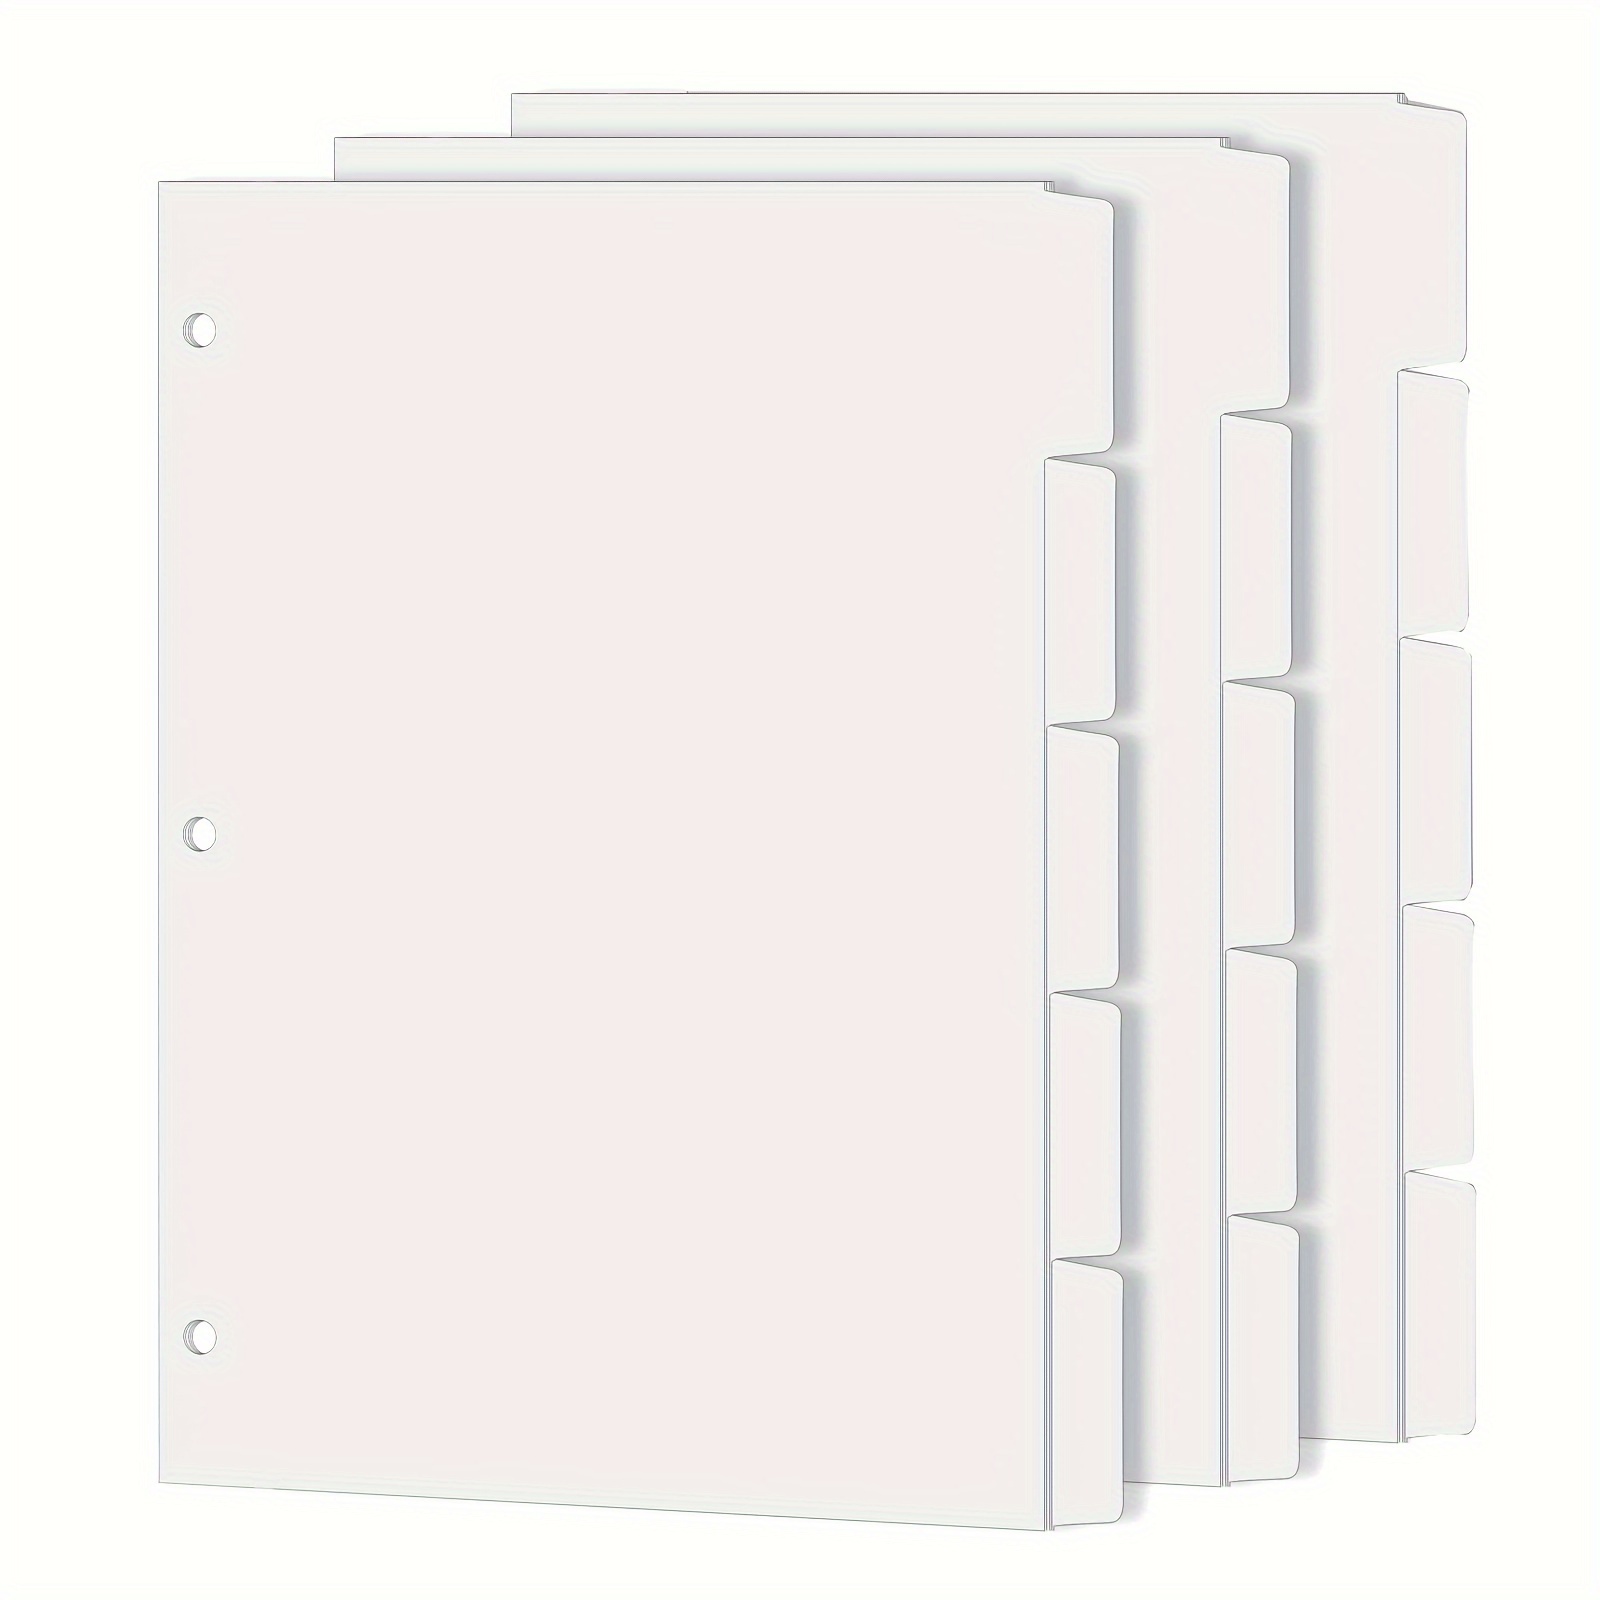 

3 Sets Binder Dividers For 3 Ring Binder, 1/5 Cut Tabs, Letter Size, Blank Write On Page Dividers With 5 Tabs For School Office Home, 3 Sets, 15 Dividers, White